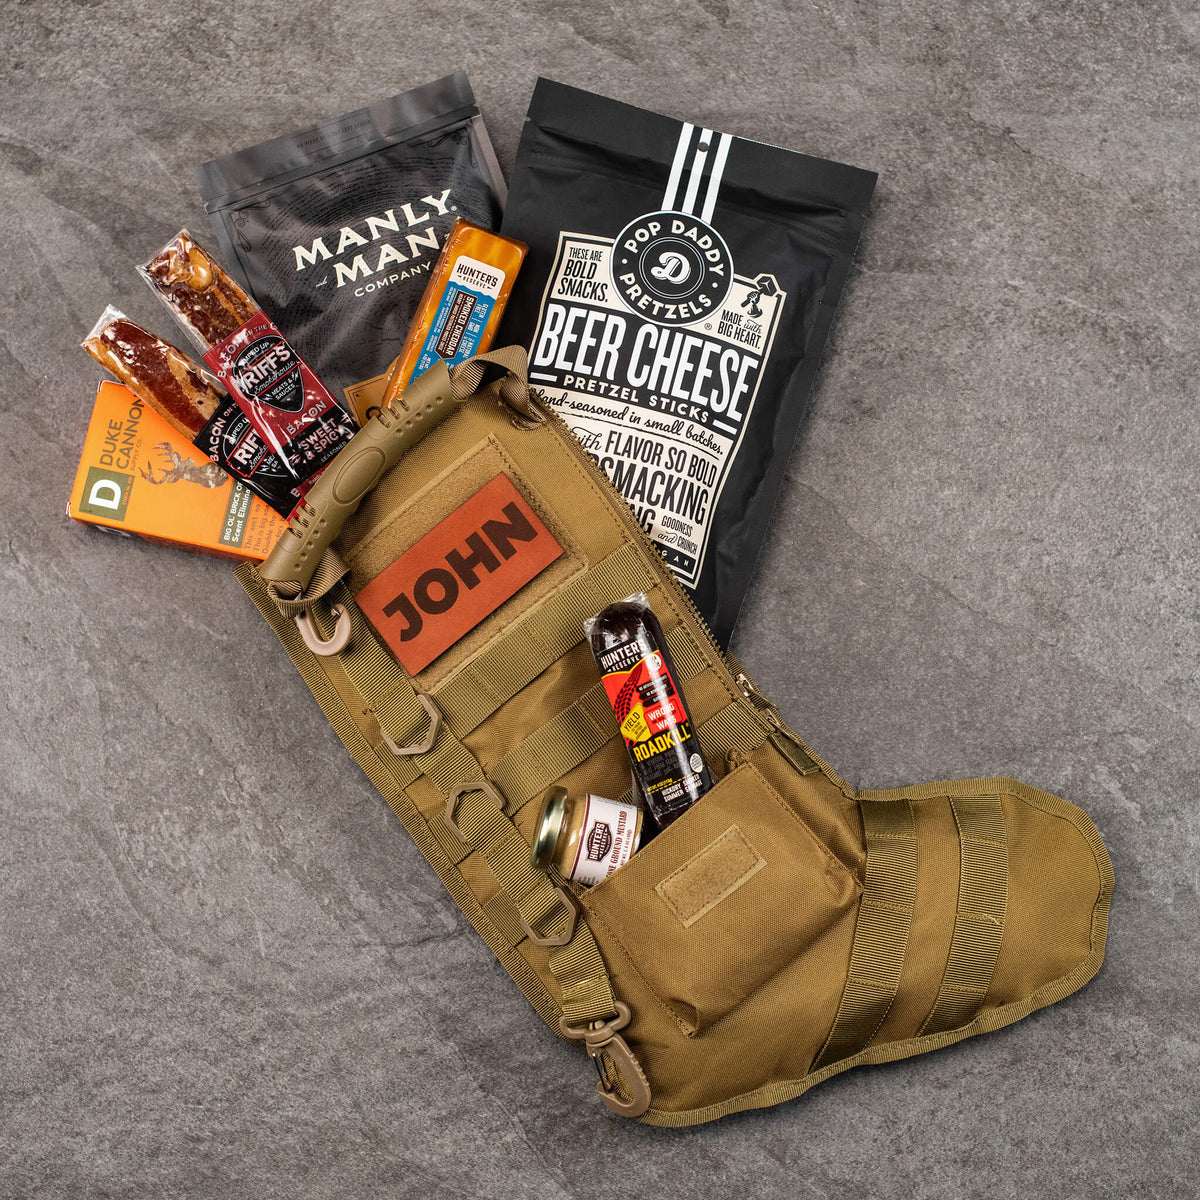 The Huntsman Tactical Stocking